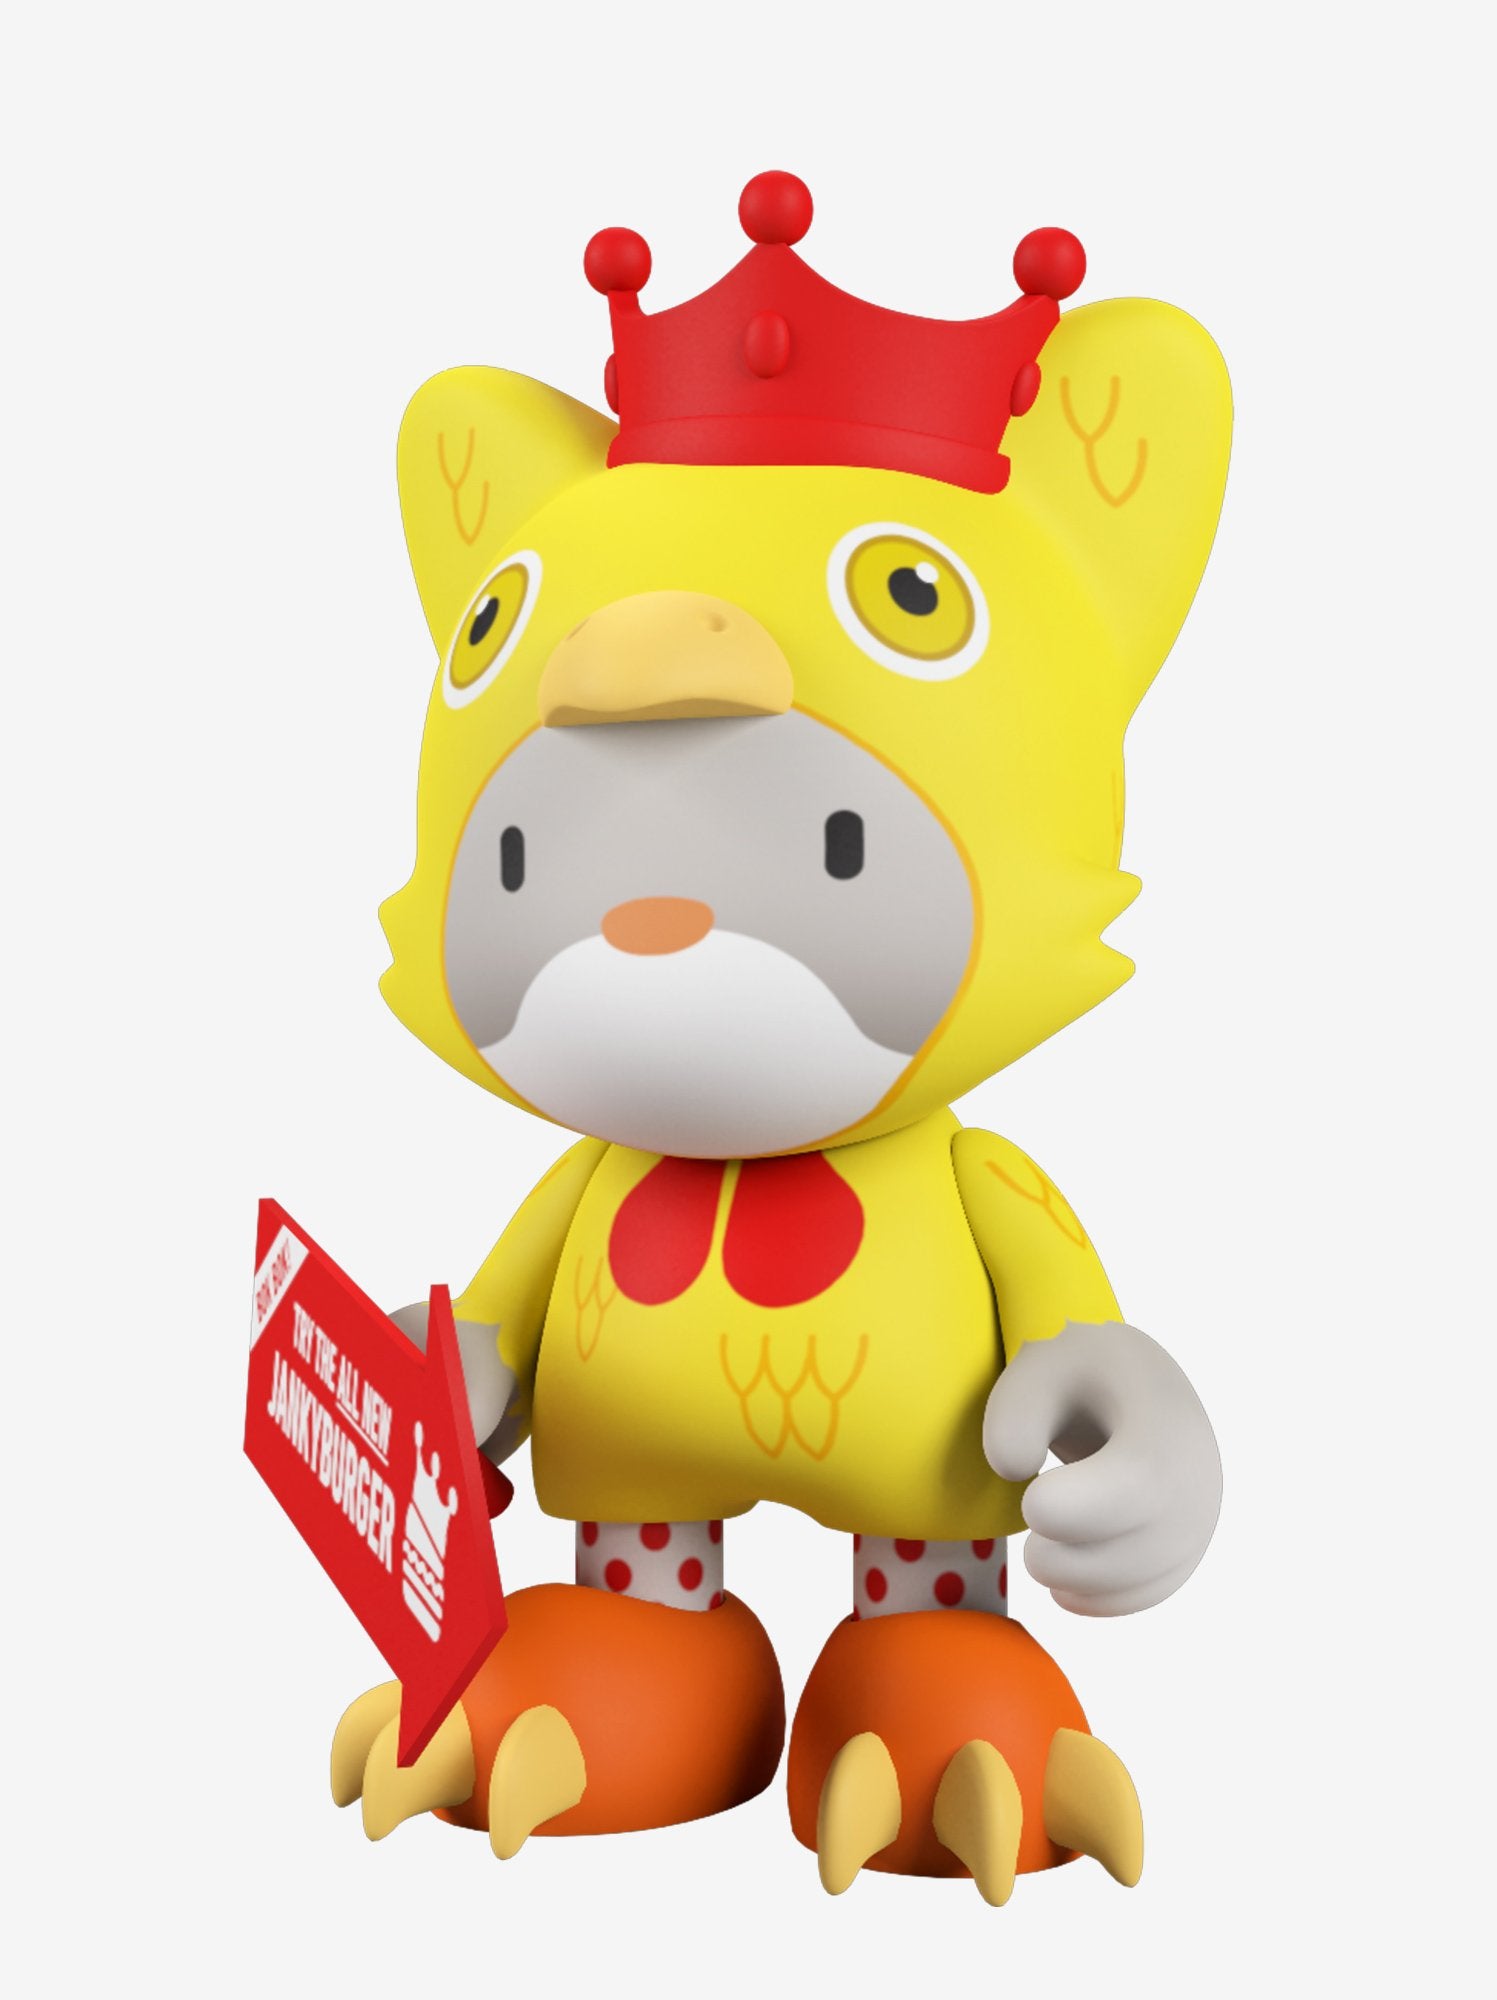 King Janky The Fifth Mini Figure by Superplastic